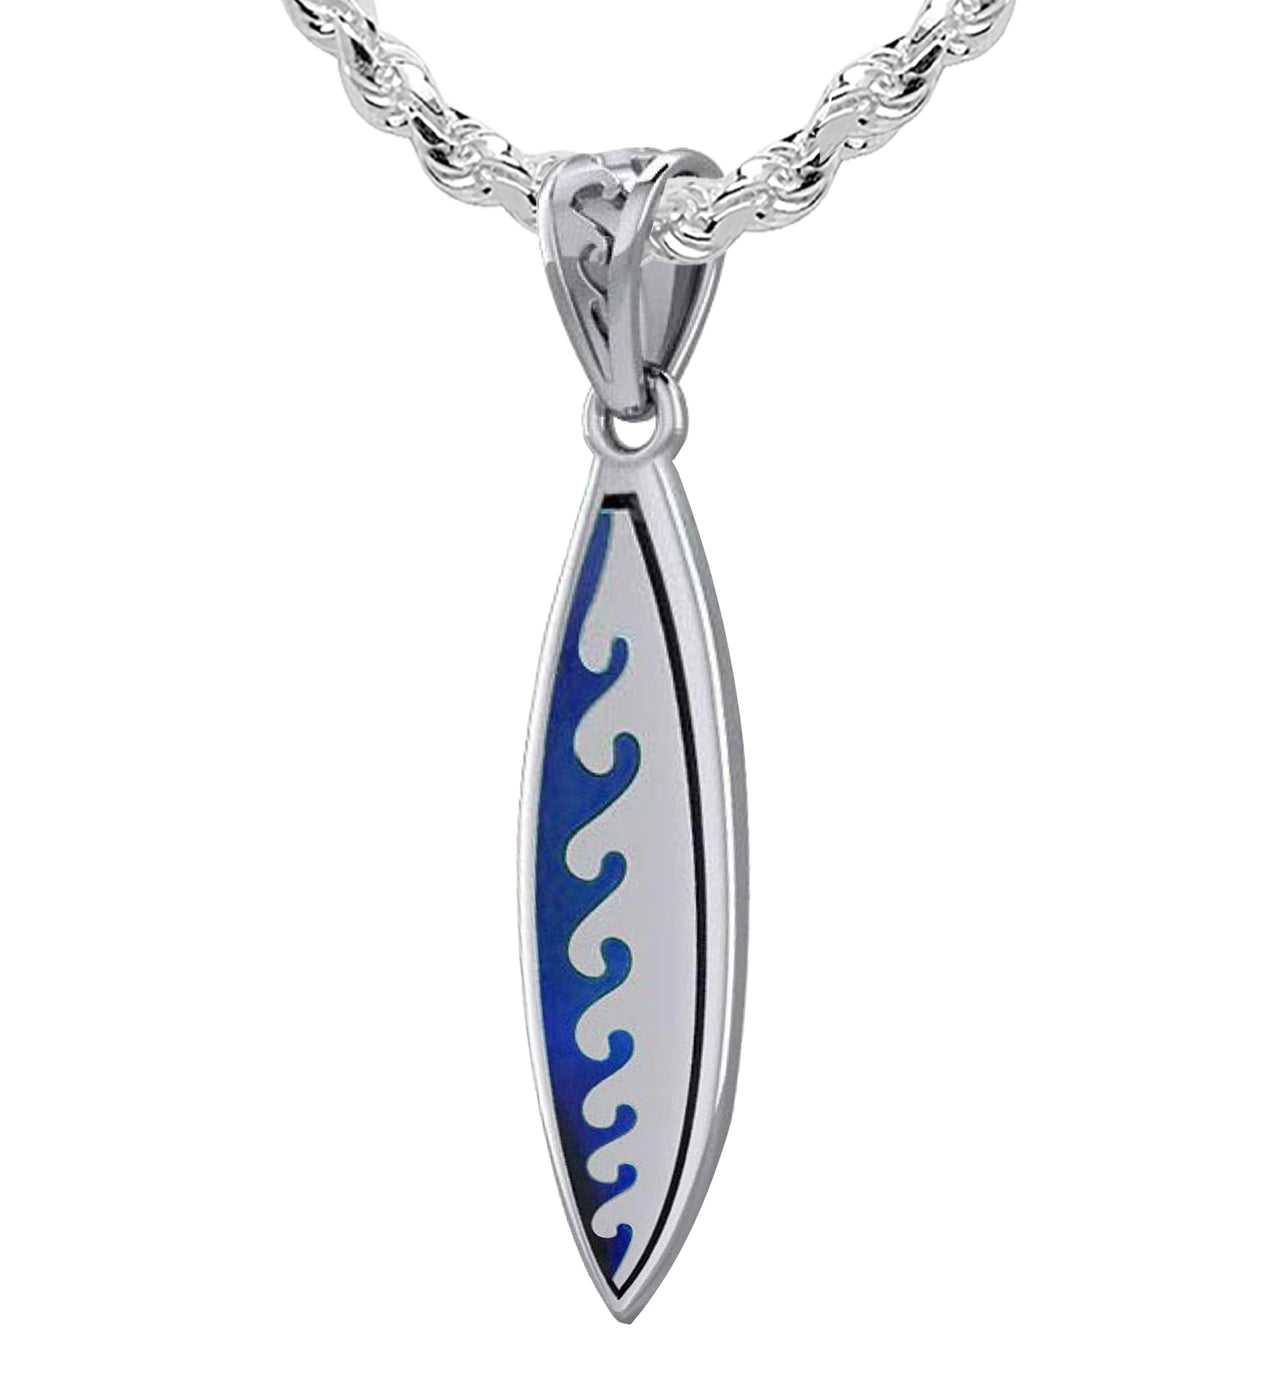 Men's XL Heavy Solid 2in 925 Sterling Silver Wave Surfboard Pendant Necklace, 53mm